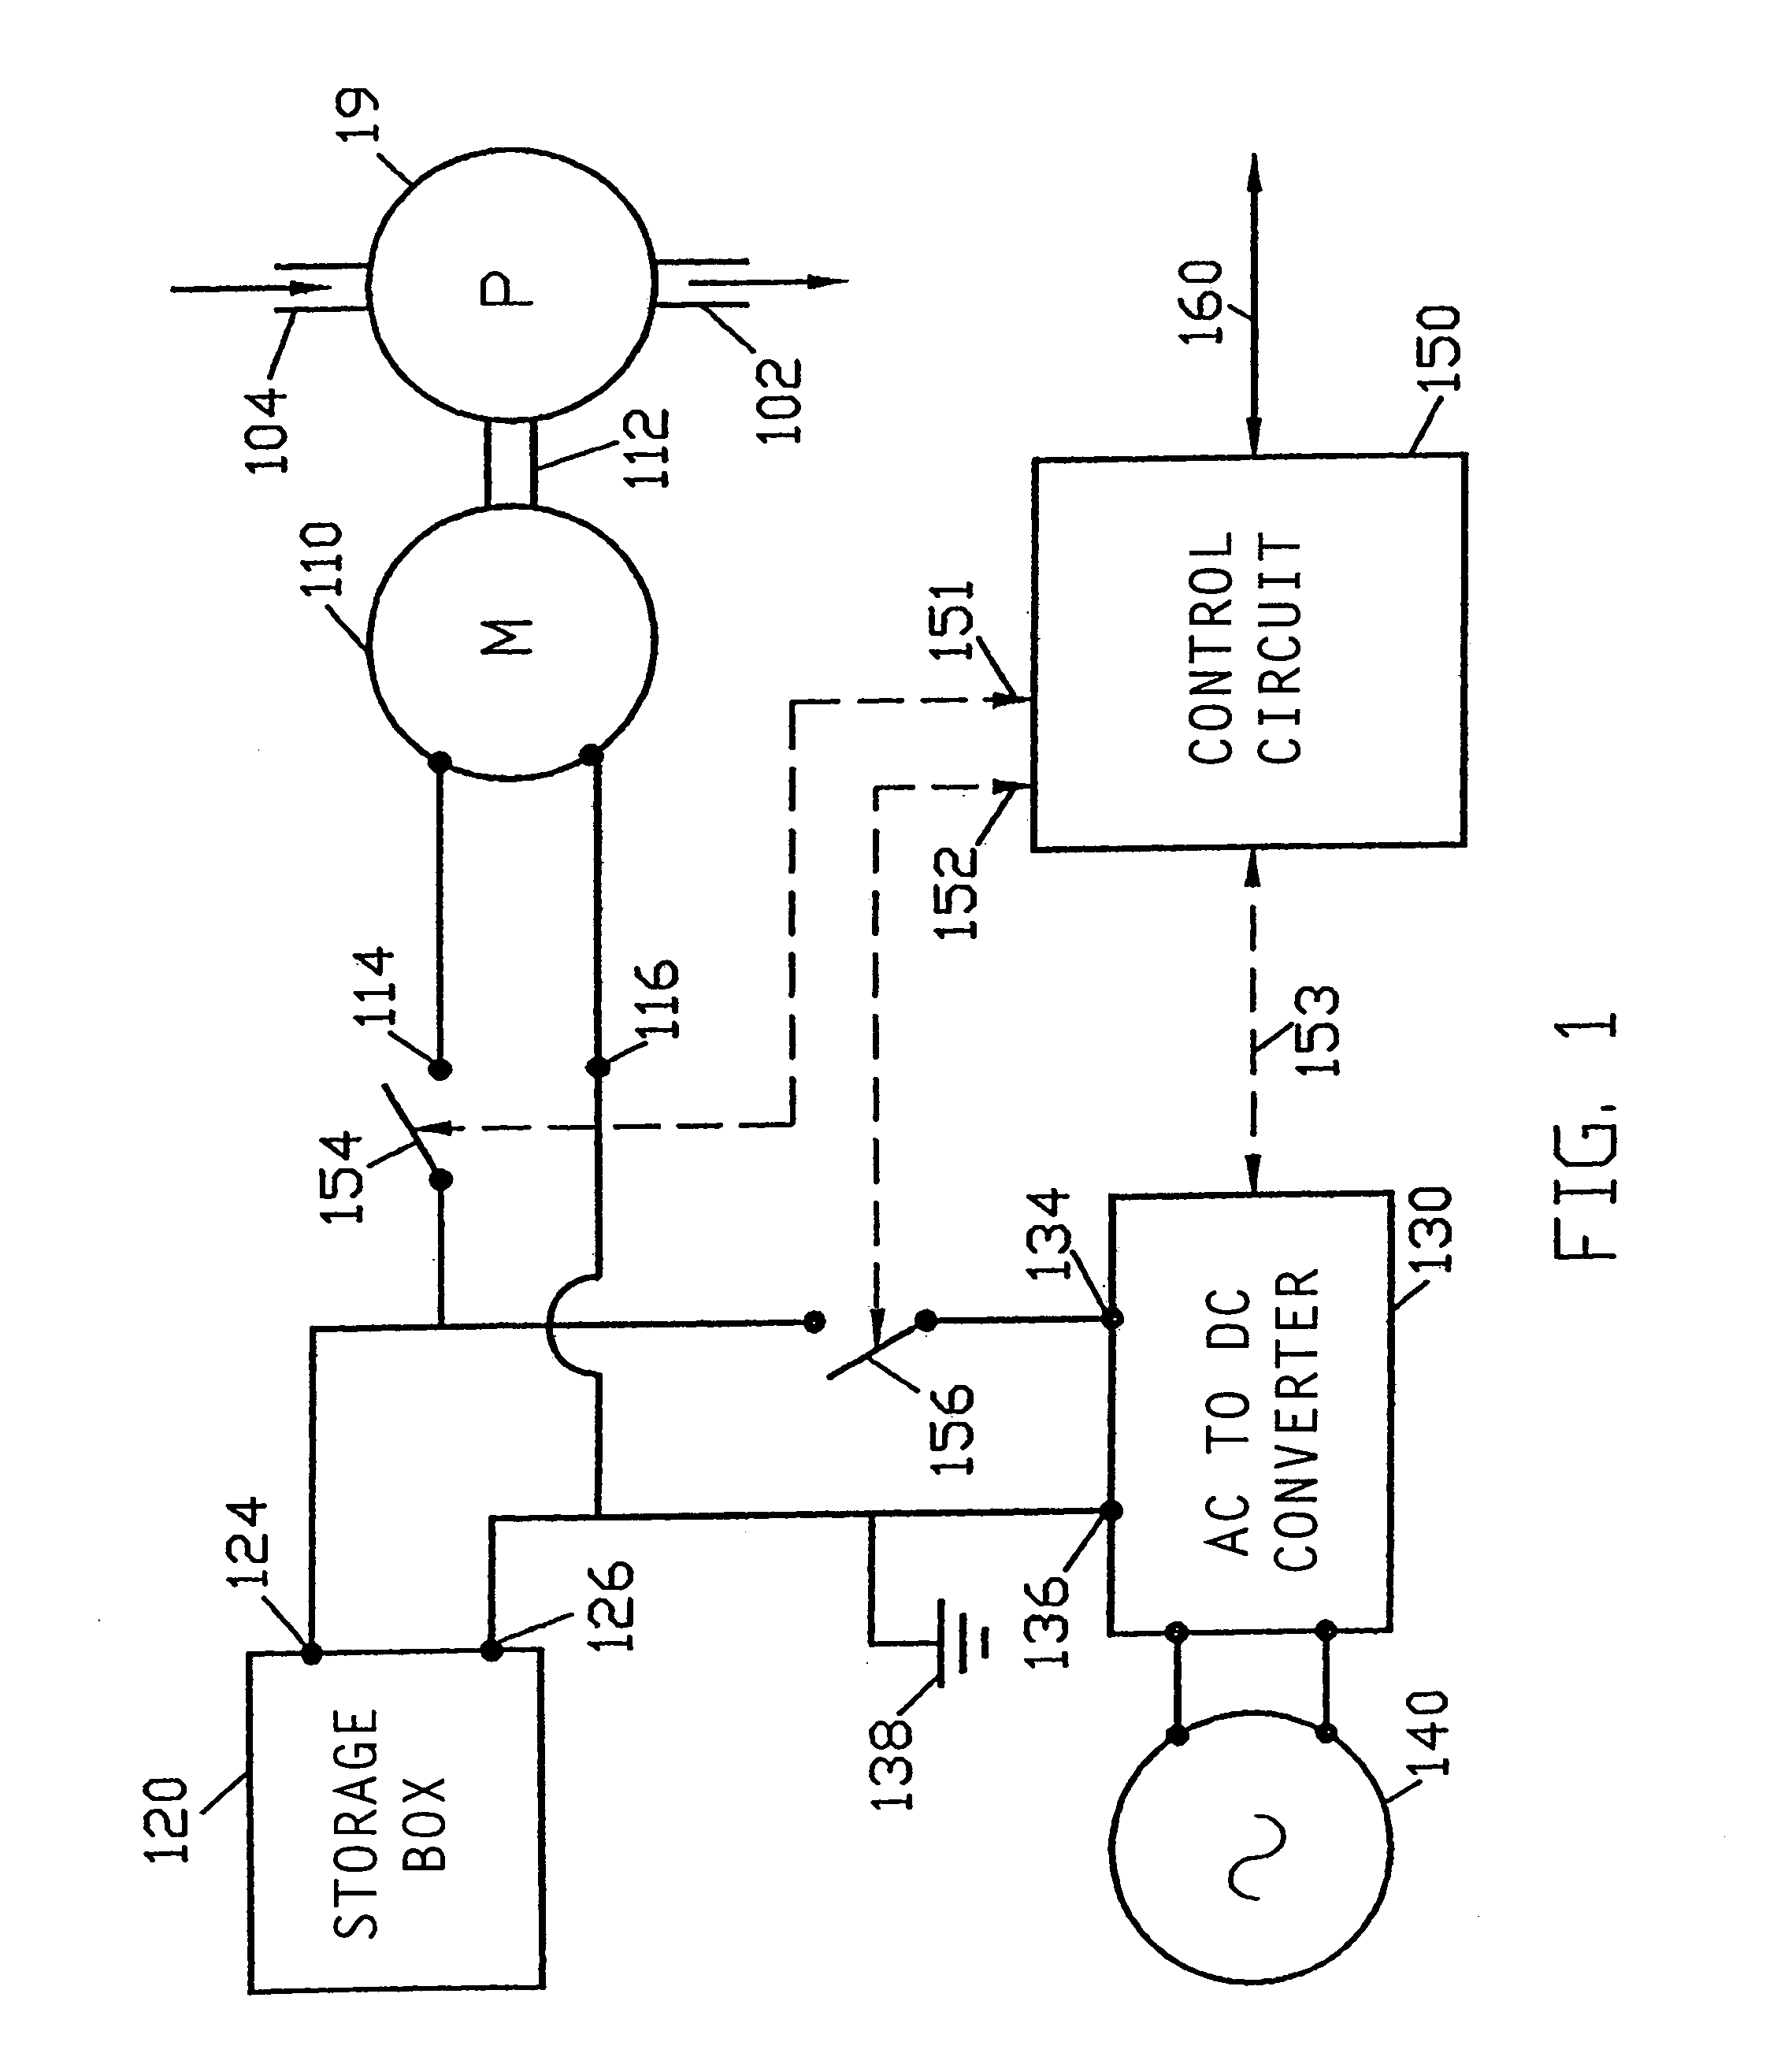 Battery-powered air handling system for subsurface aeration